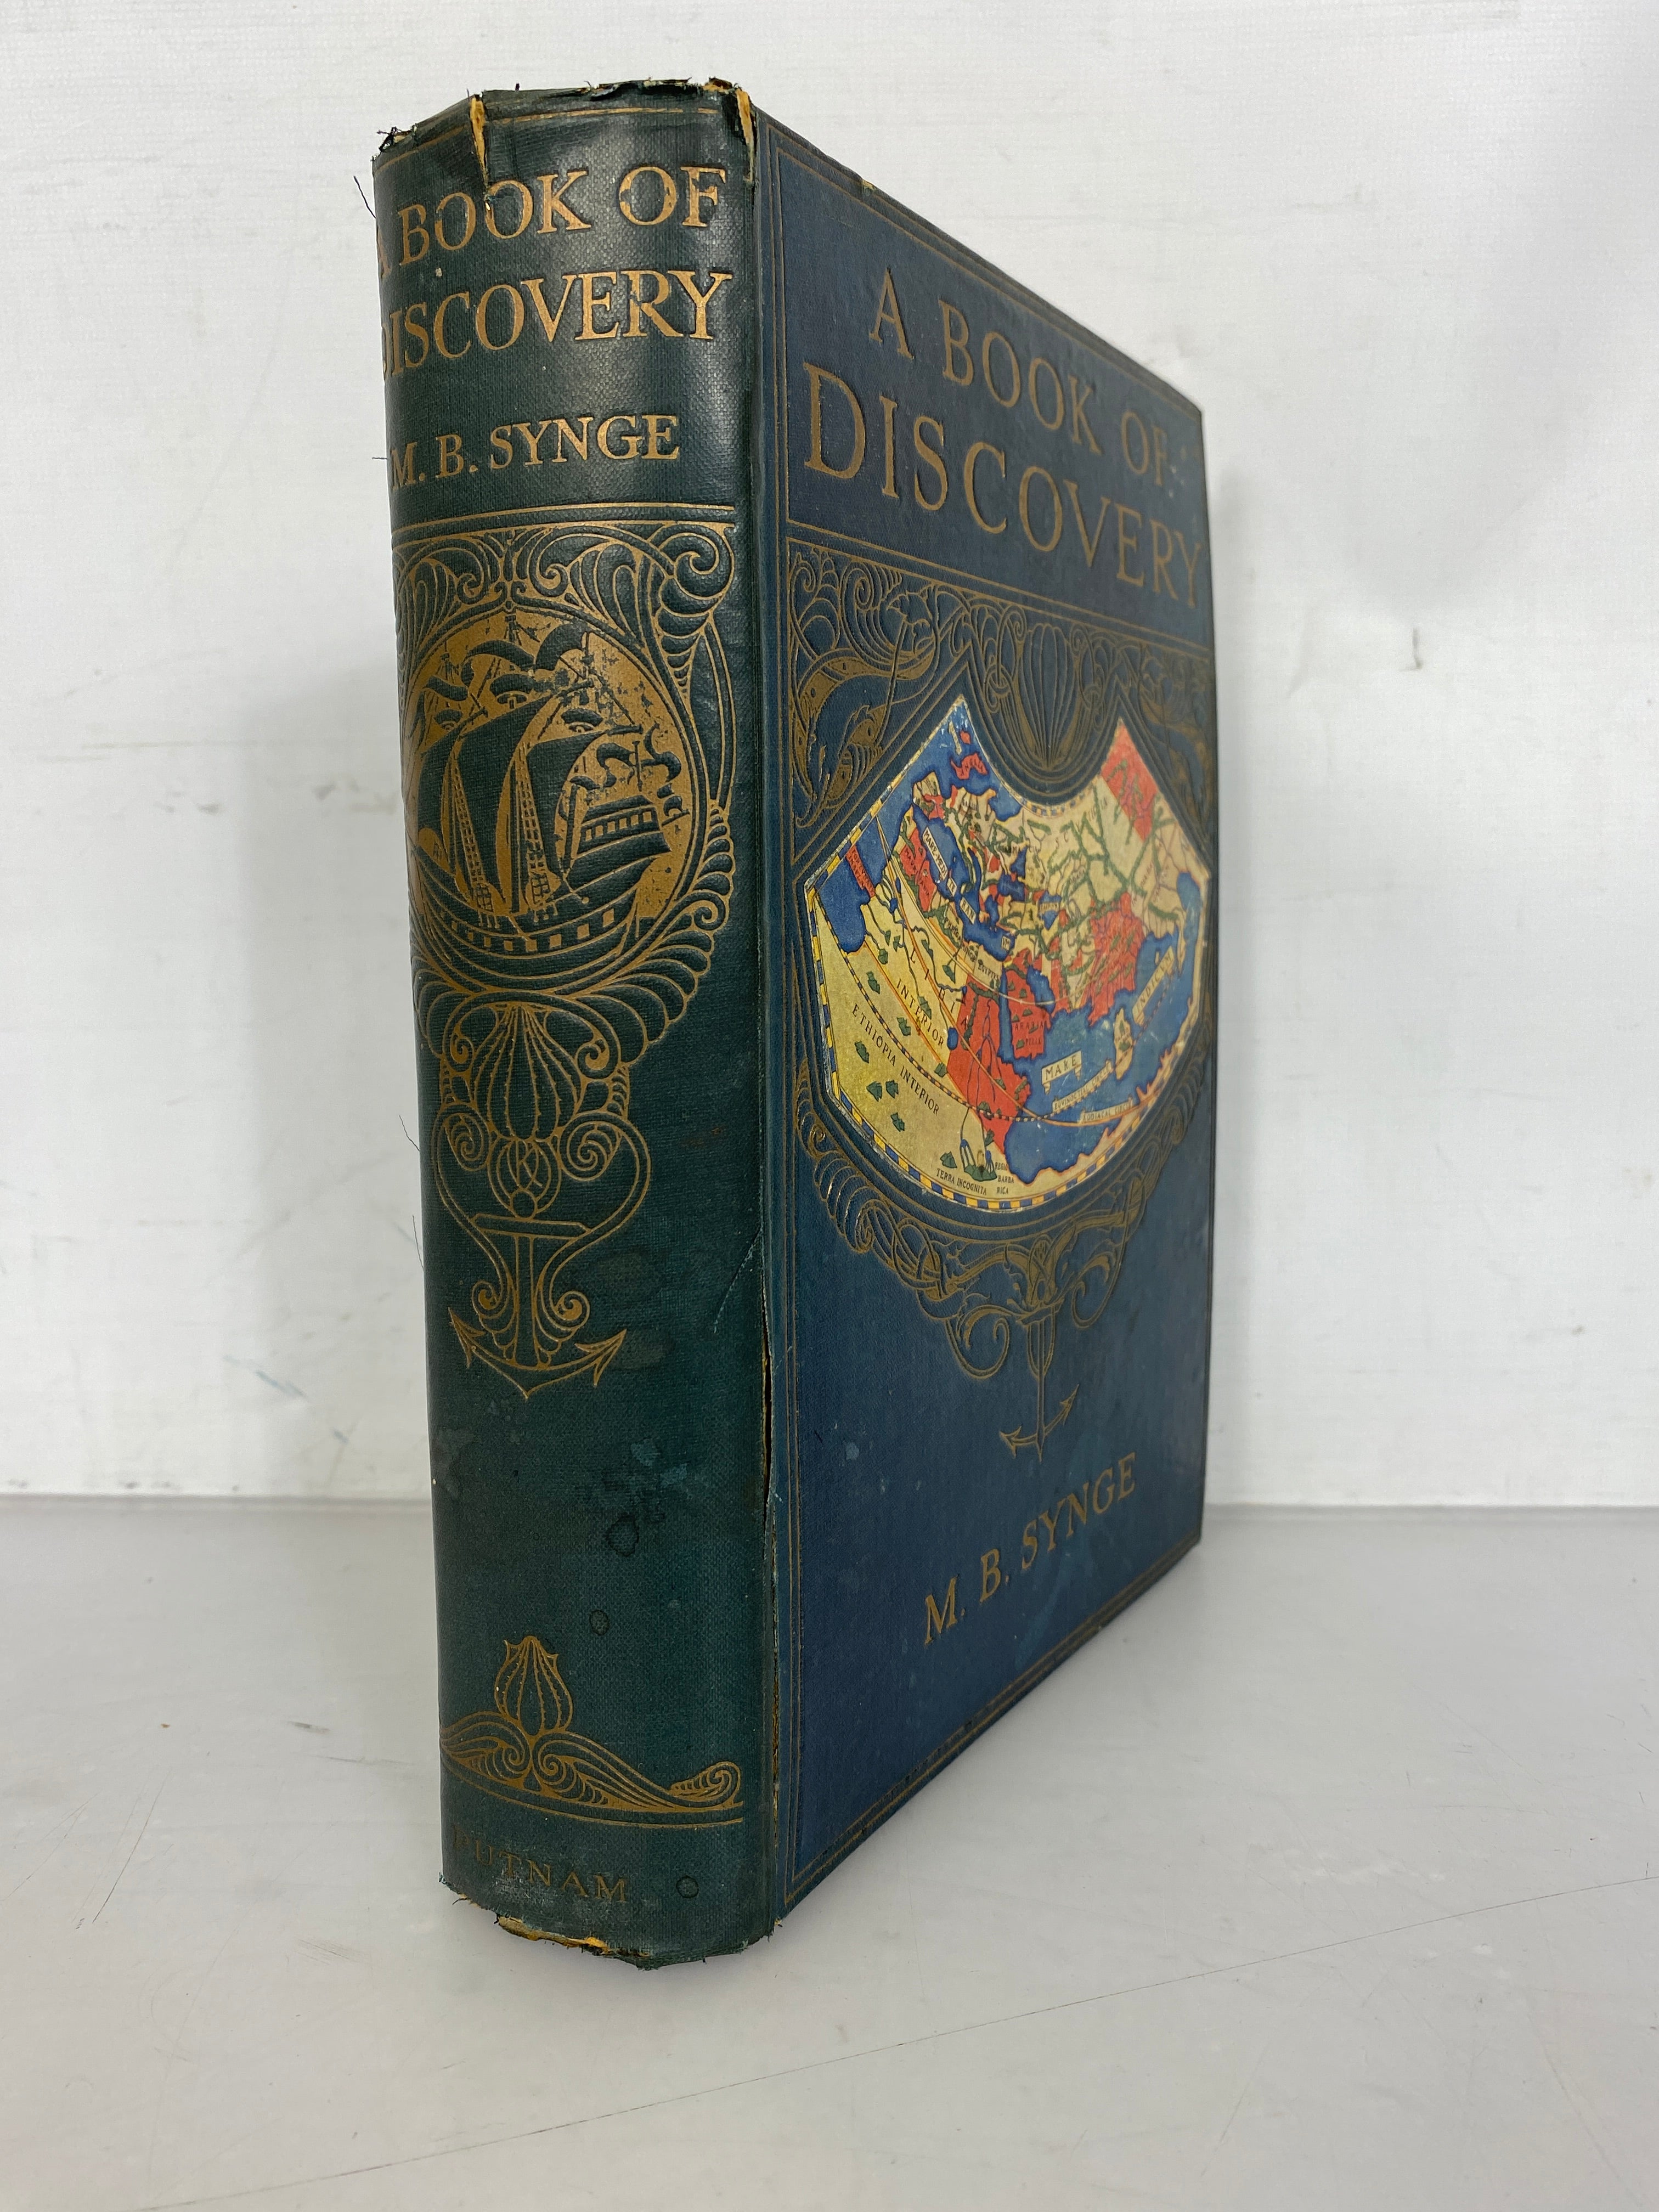 A Book of Discovery by M.B. Synge (c1915) Antique HC First American Edition (Copy)